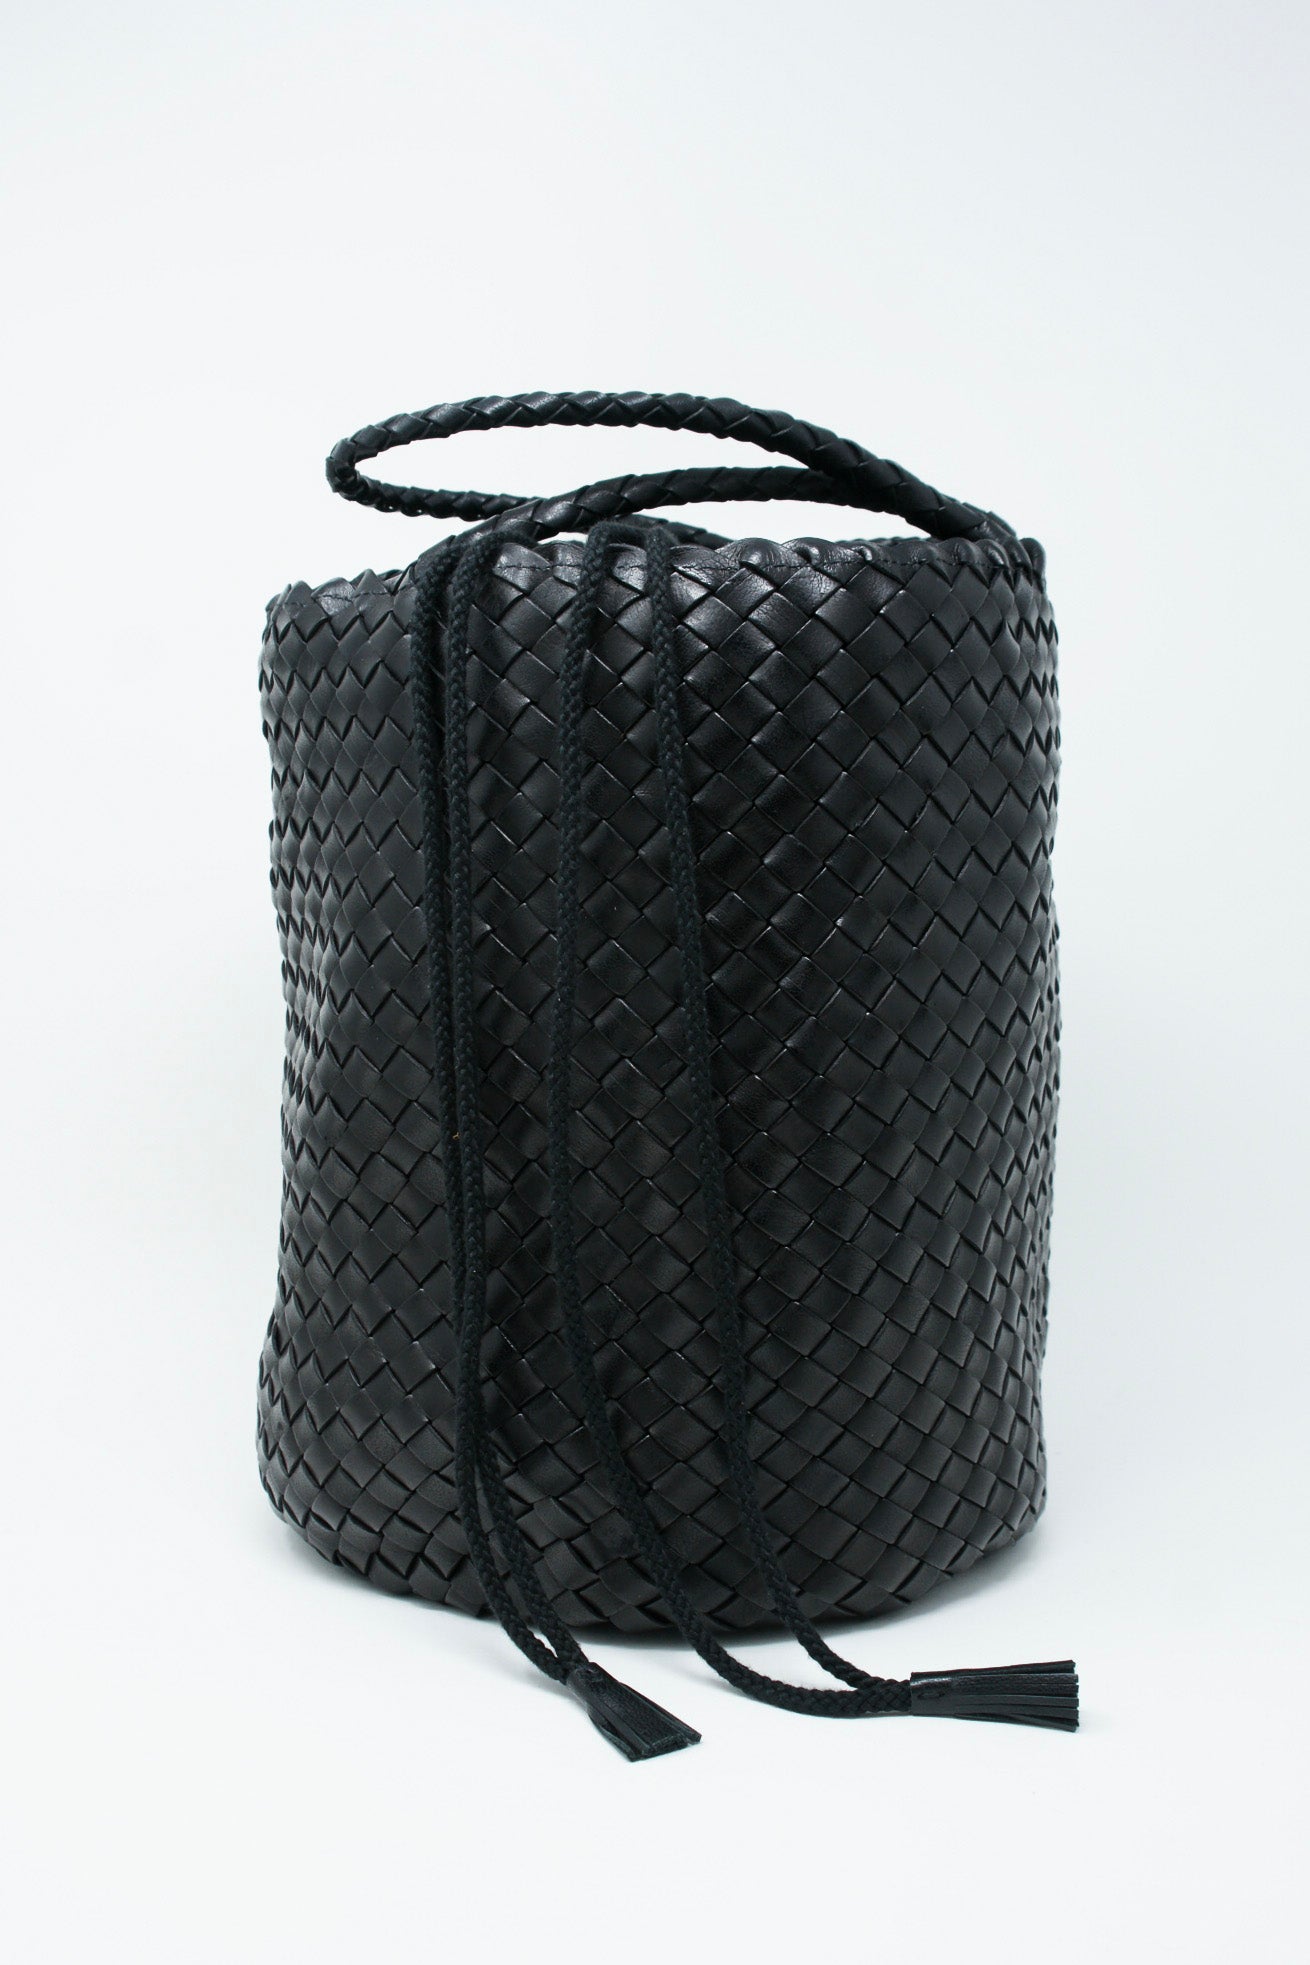 A Jacky Bucket Bag in Black, crafted using handwoven techniques and showcased on a pristine white background, made by Dragon Diffusion.